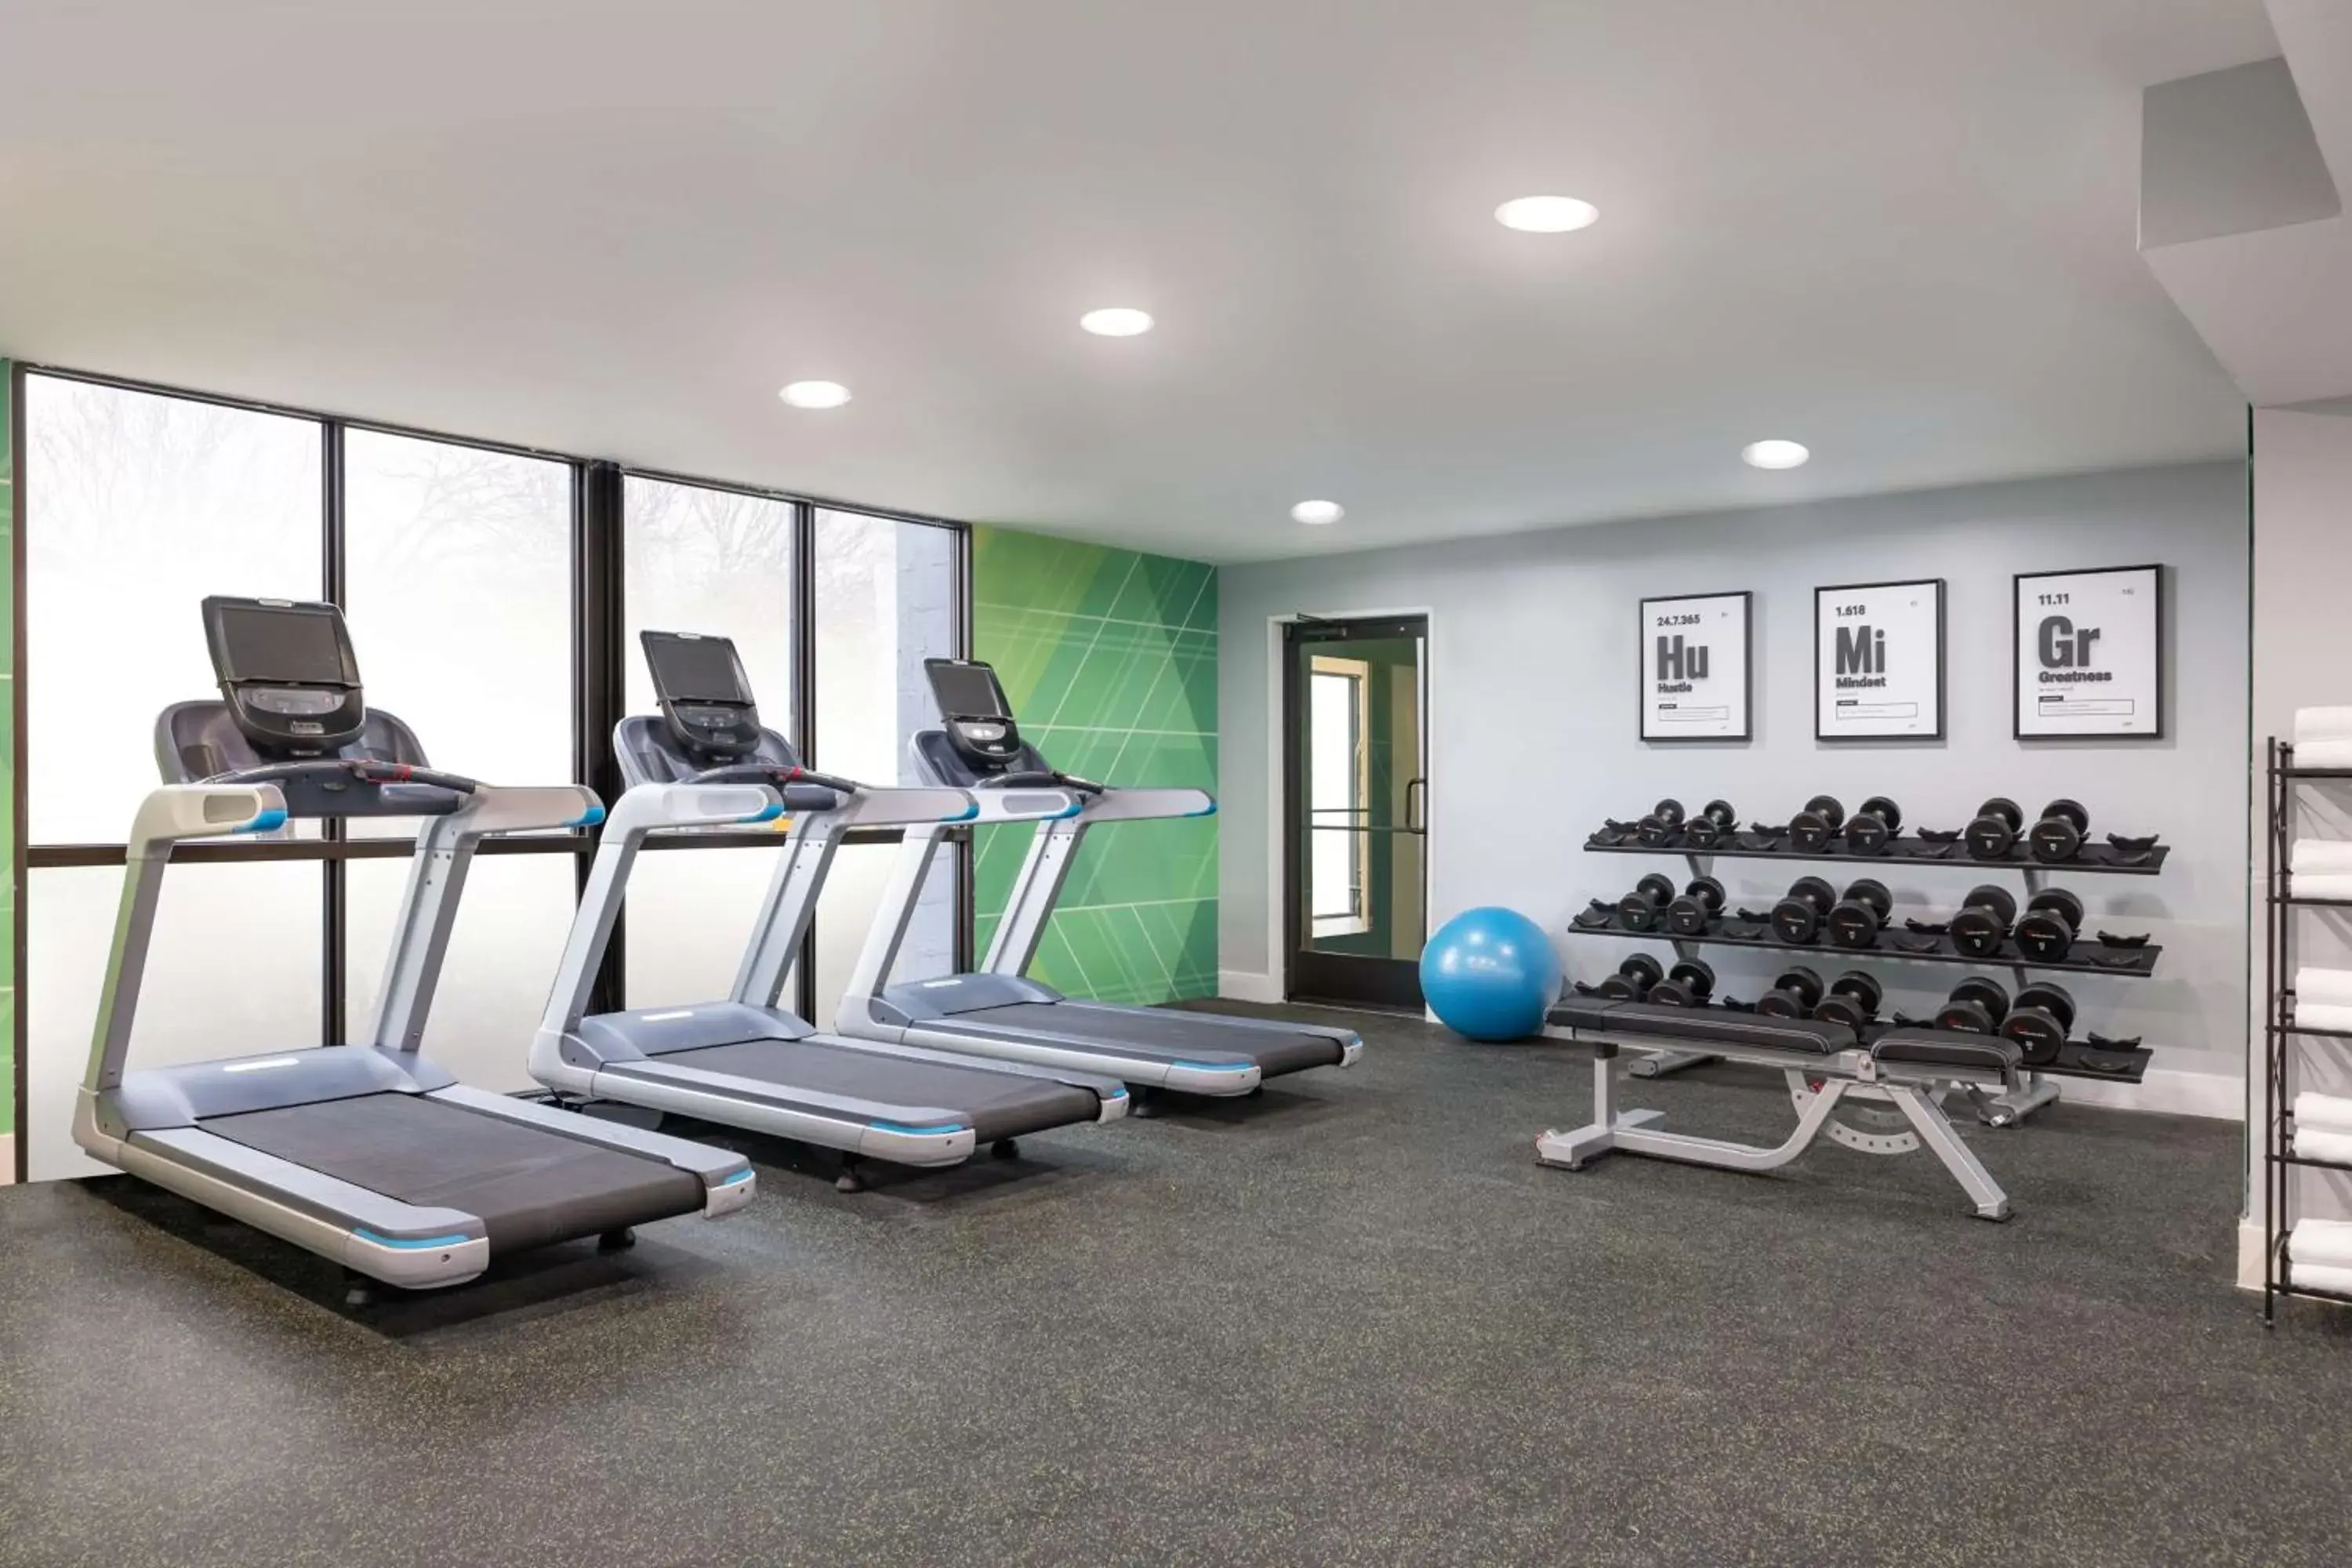 Fitness centre/facilities, Fitness Center/Facilities in Doubletree By Hilton Fort Worth South